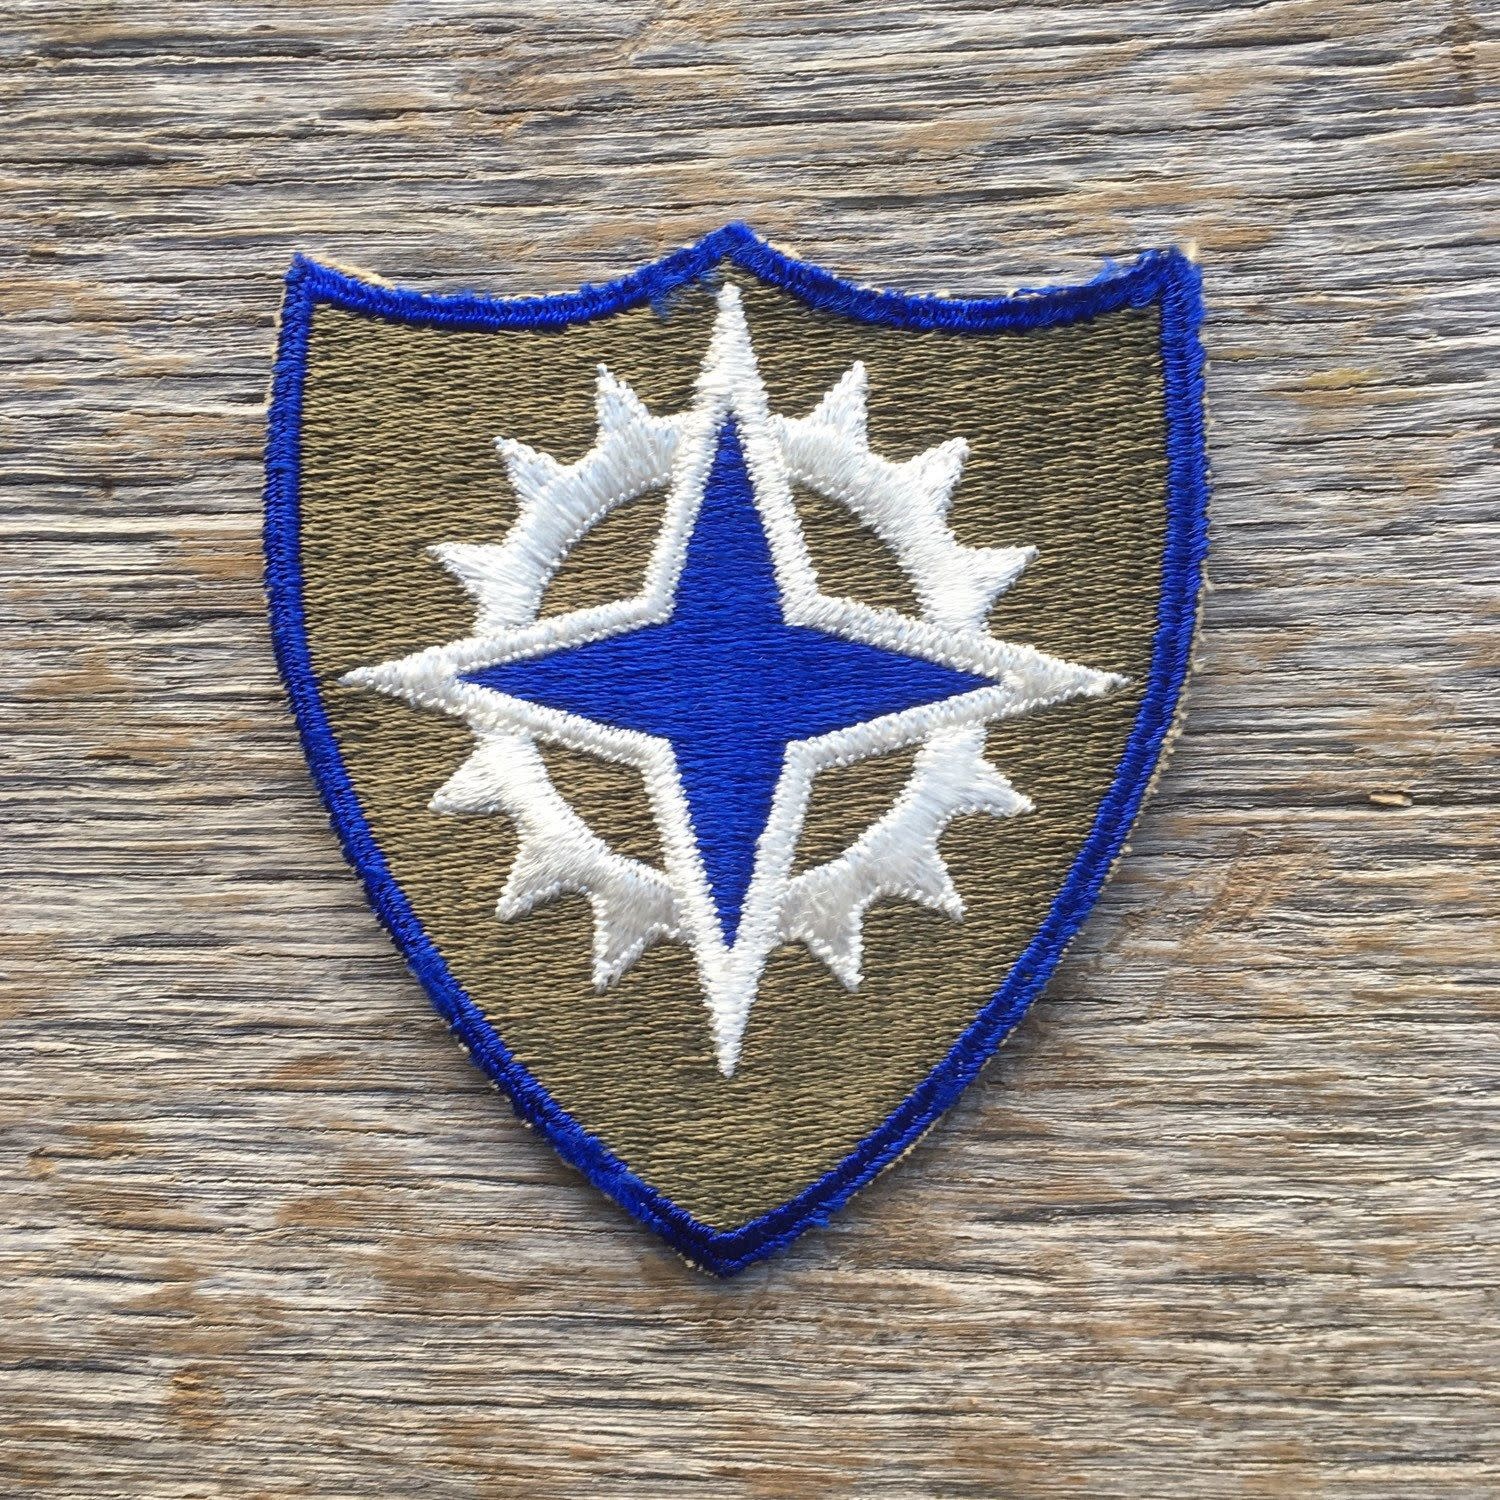 Military 16th Corps Army Patch - World War II